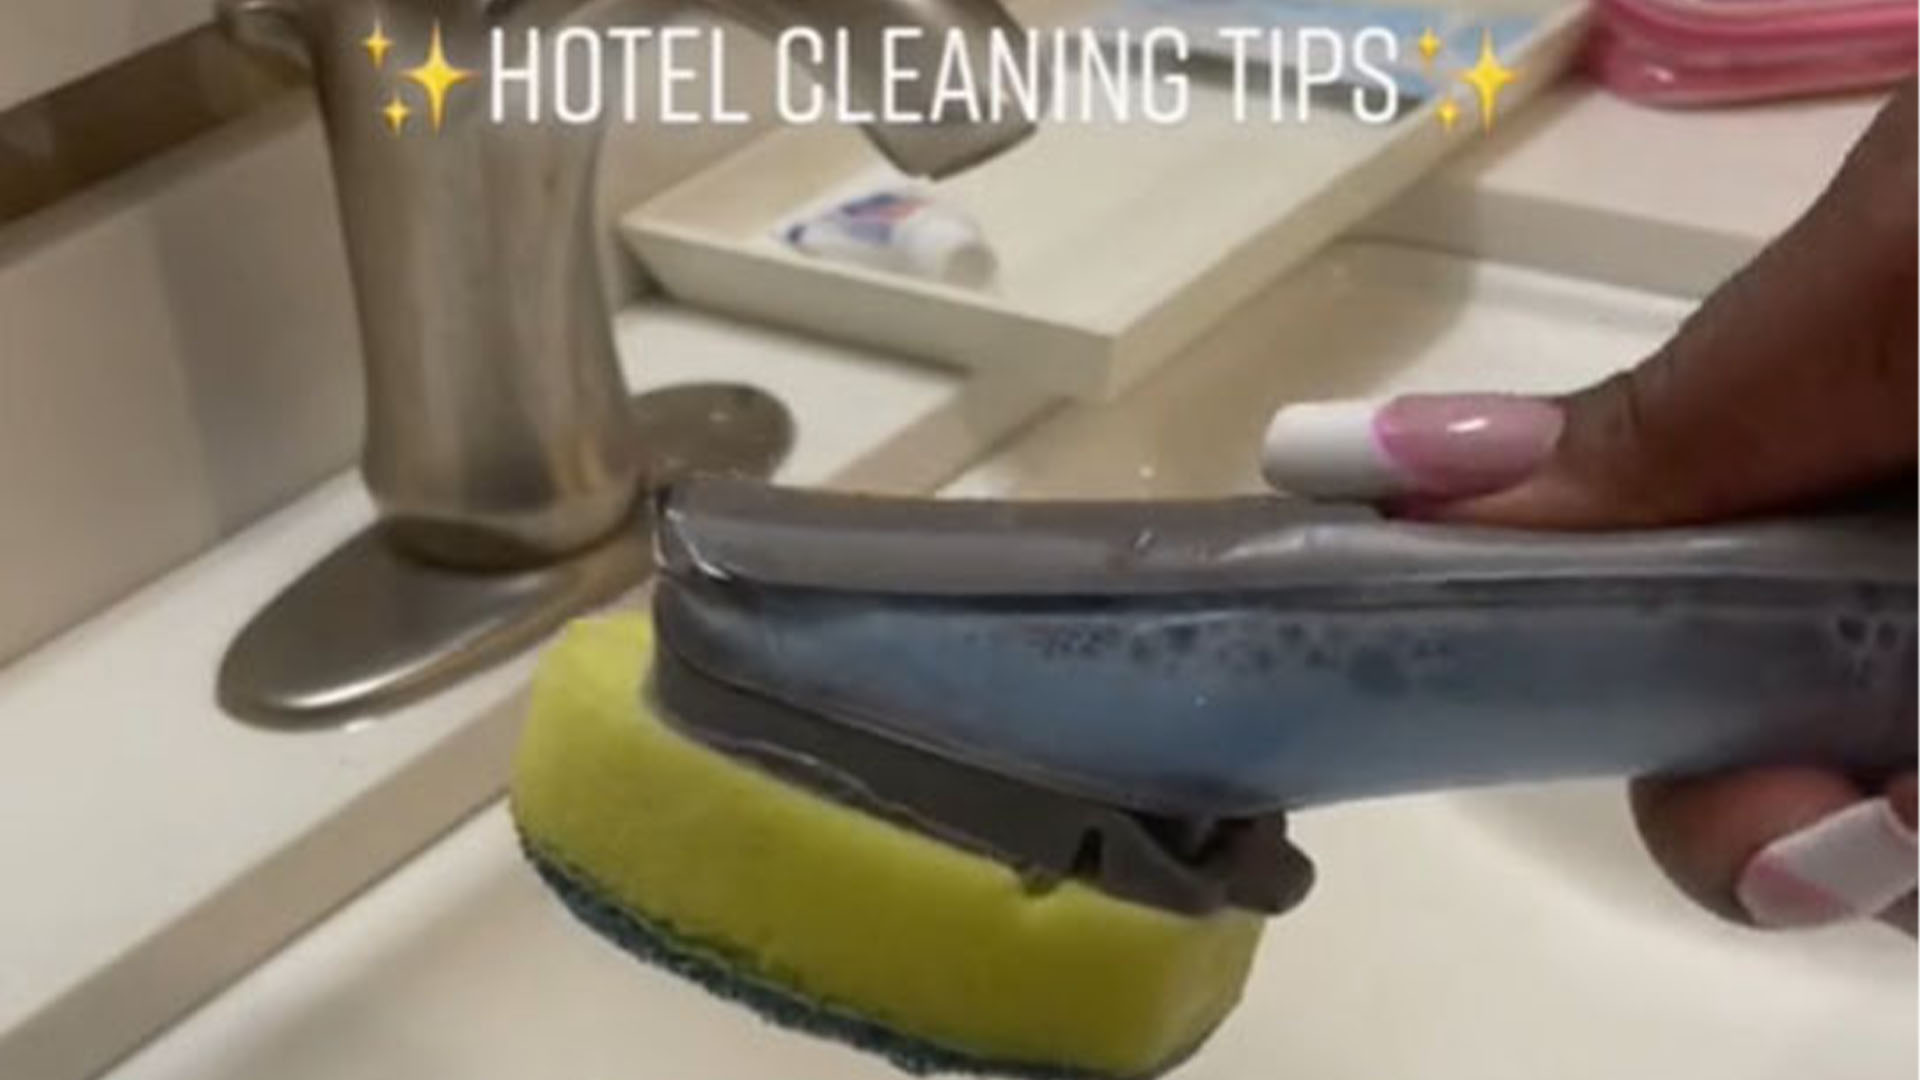 I’m a cleaning fan – six things I do when I stay at a hotel and why I always carry my own supplies